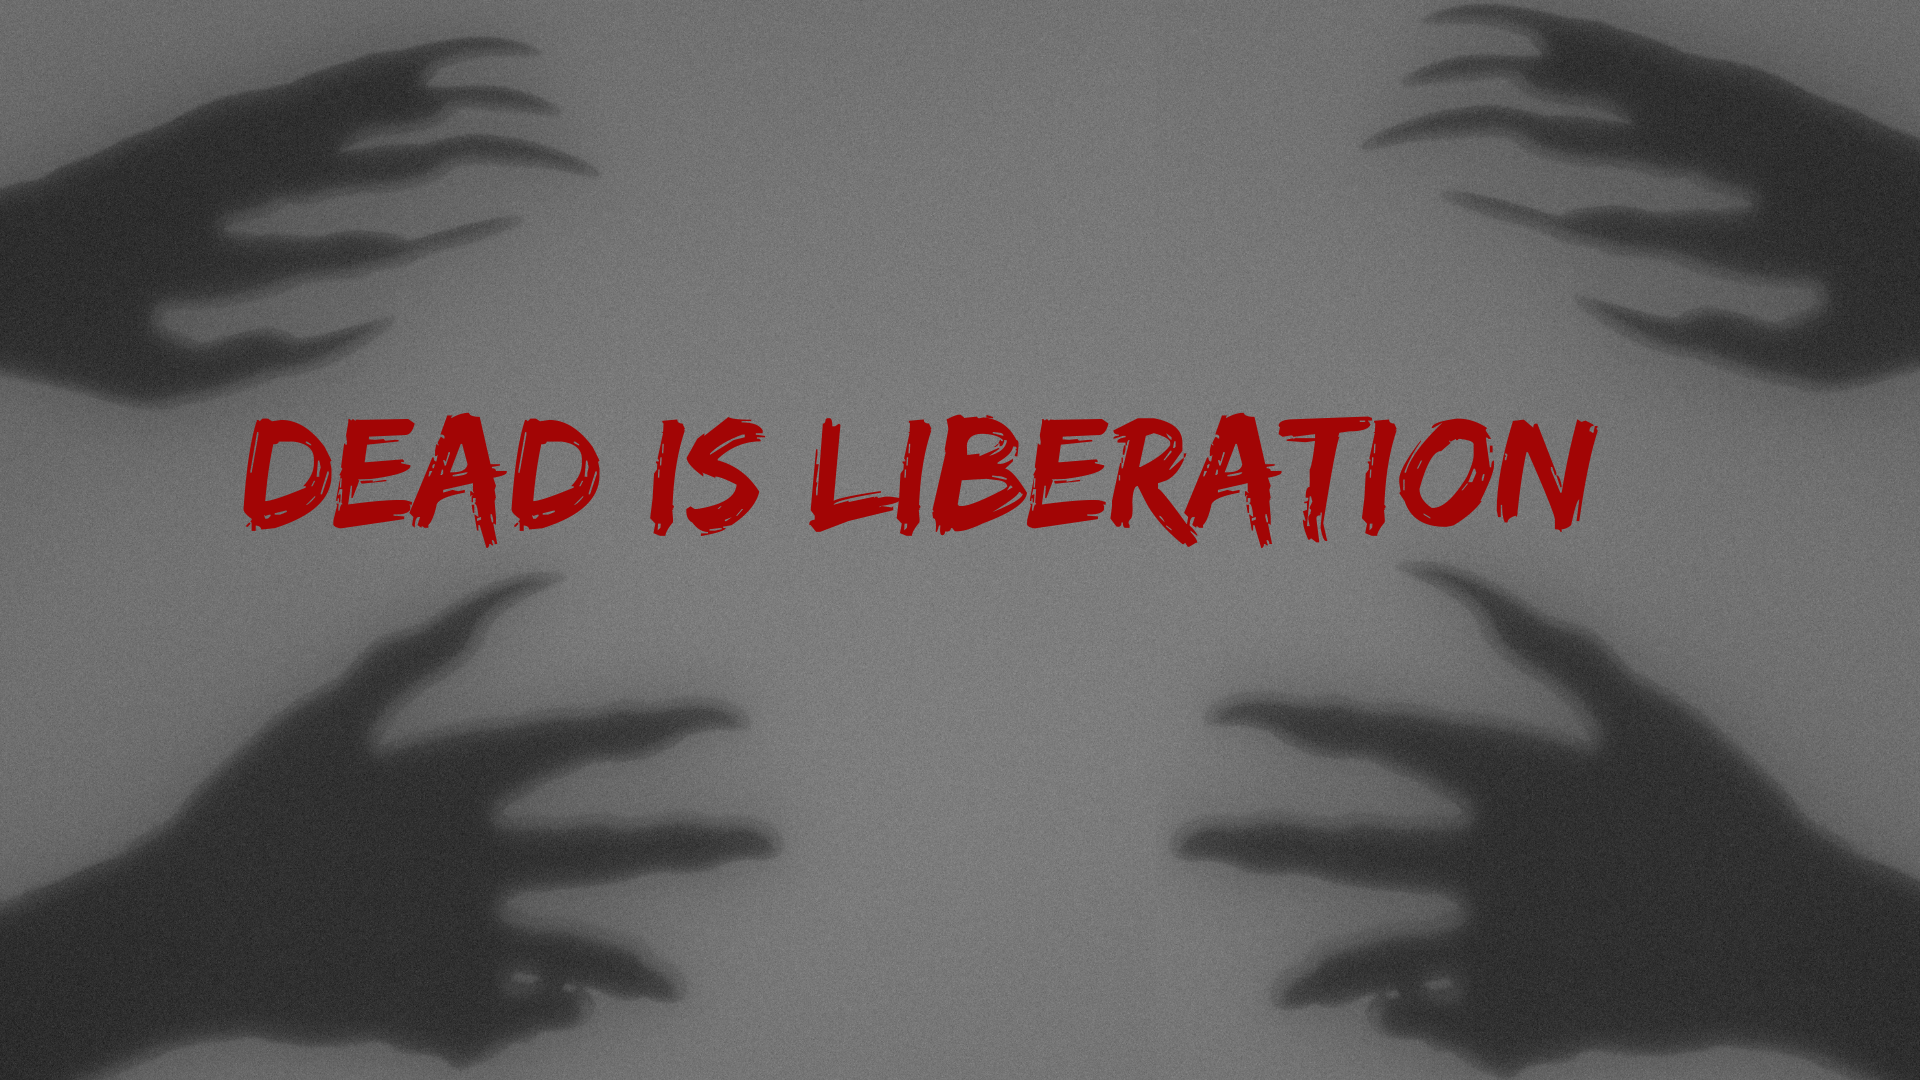 Dead is liberation